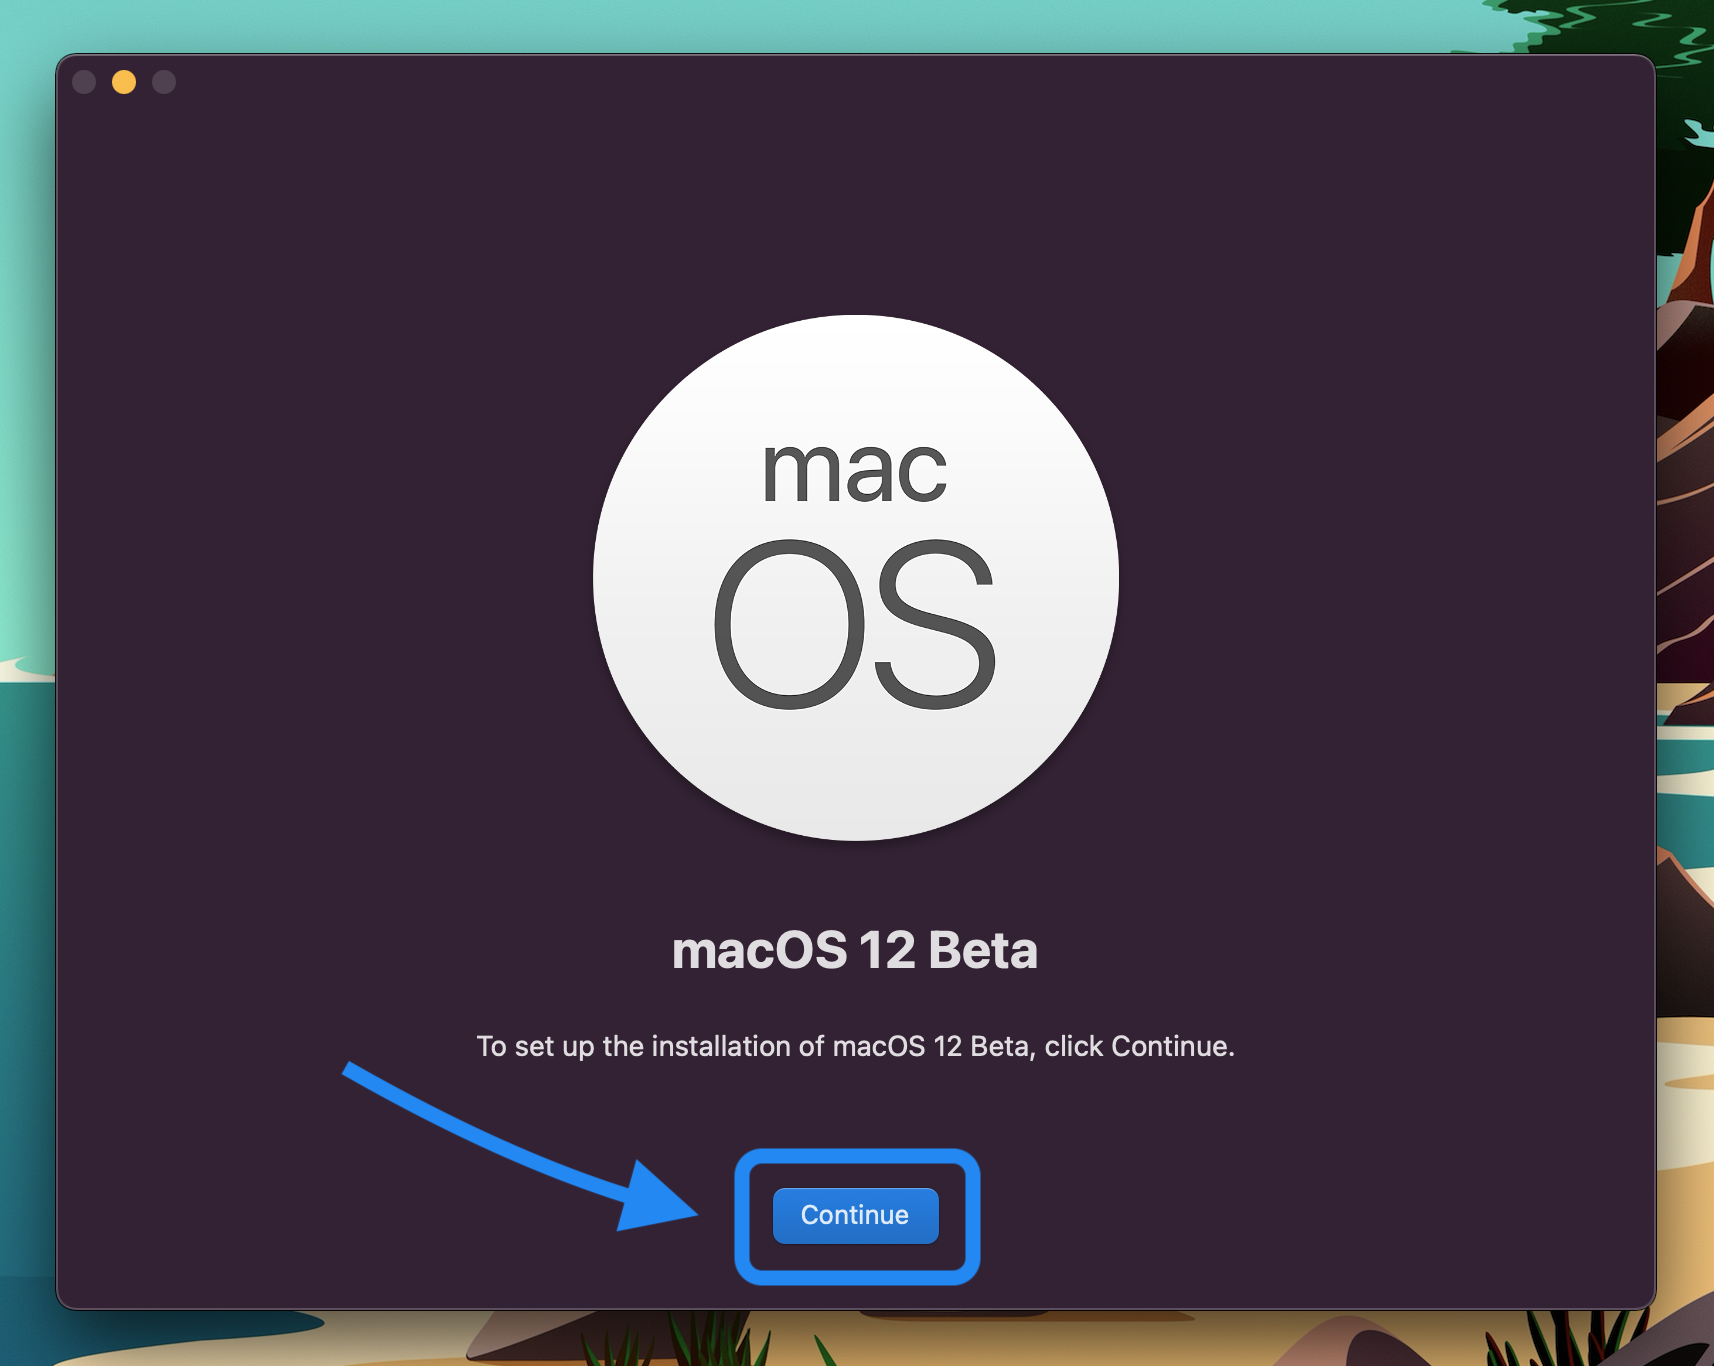 How to install macOS Monterey beta - final step click continue in installer window